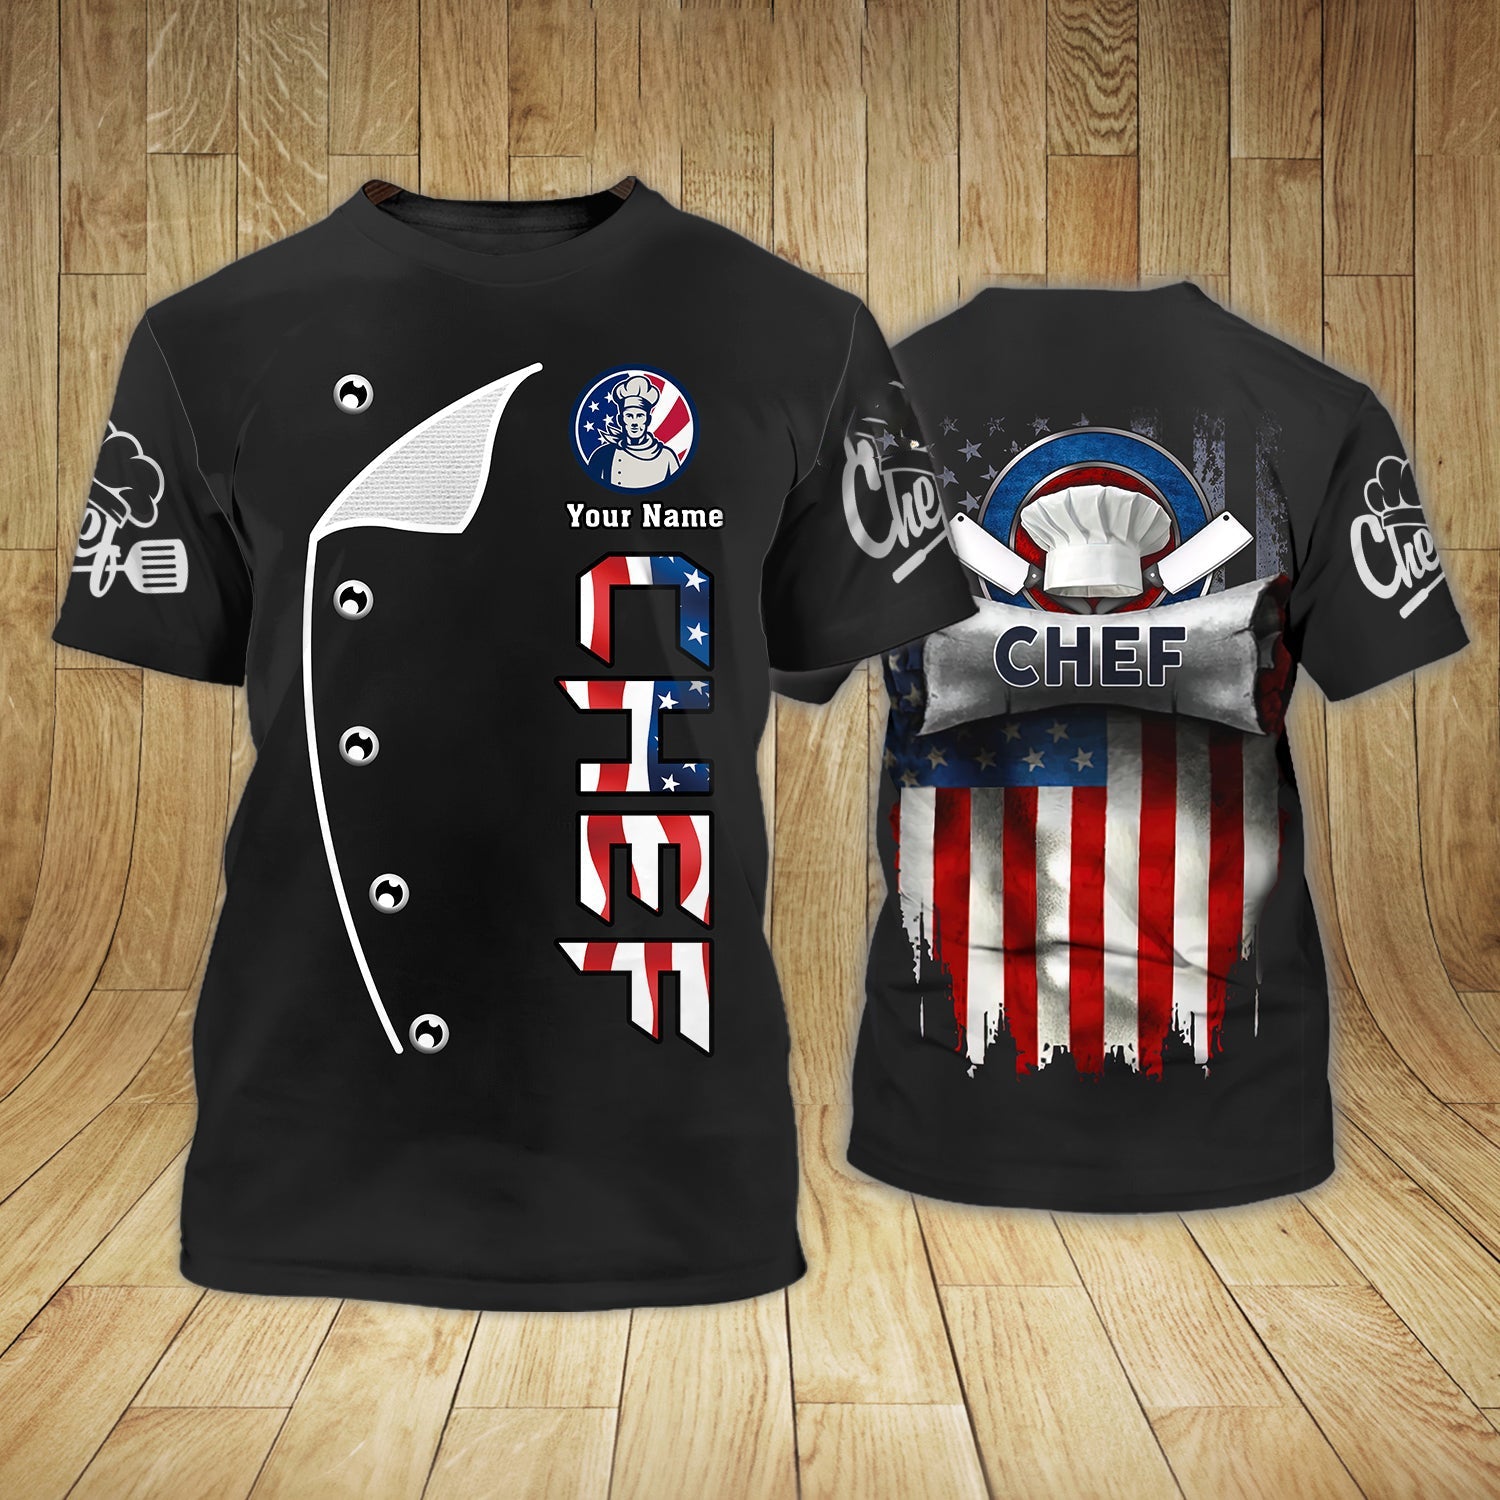 Personalized American Chef T Shirt/ 3D All Over Printed Chef Shirt Usa Flag Pattern/ Chef Shirt